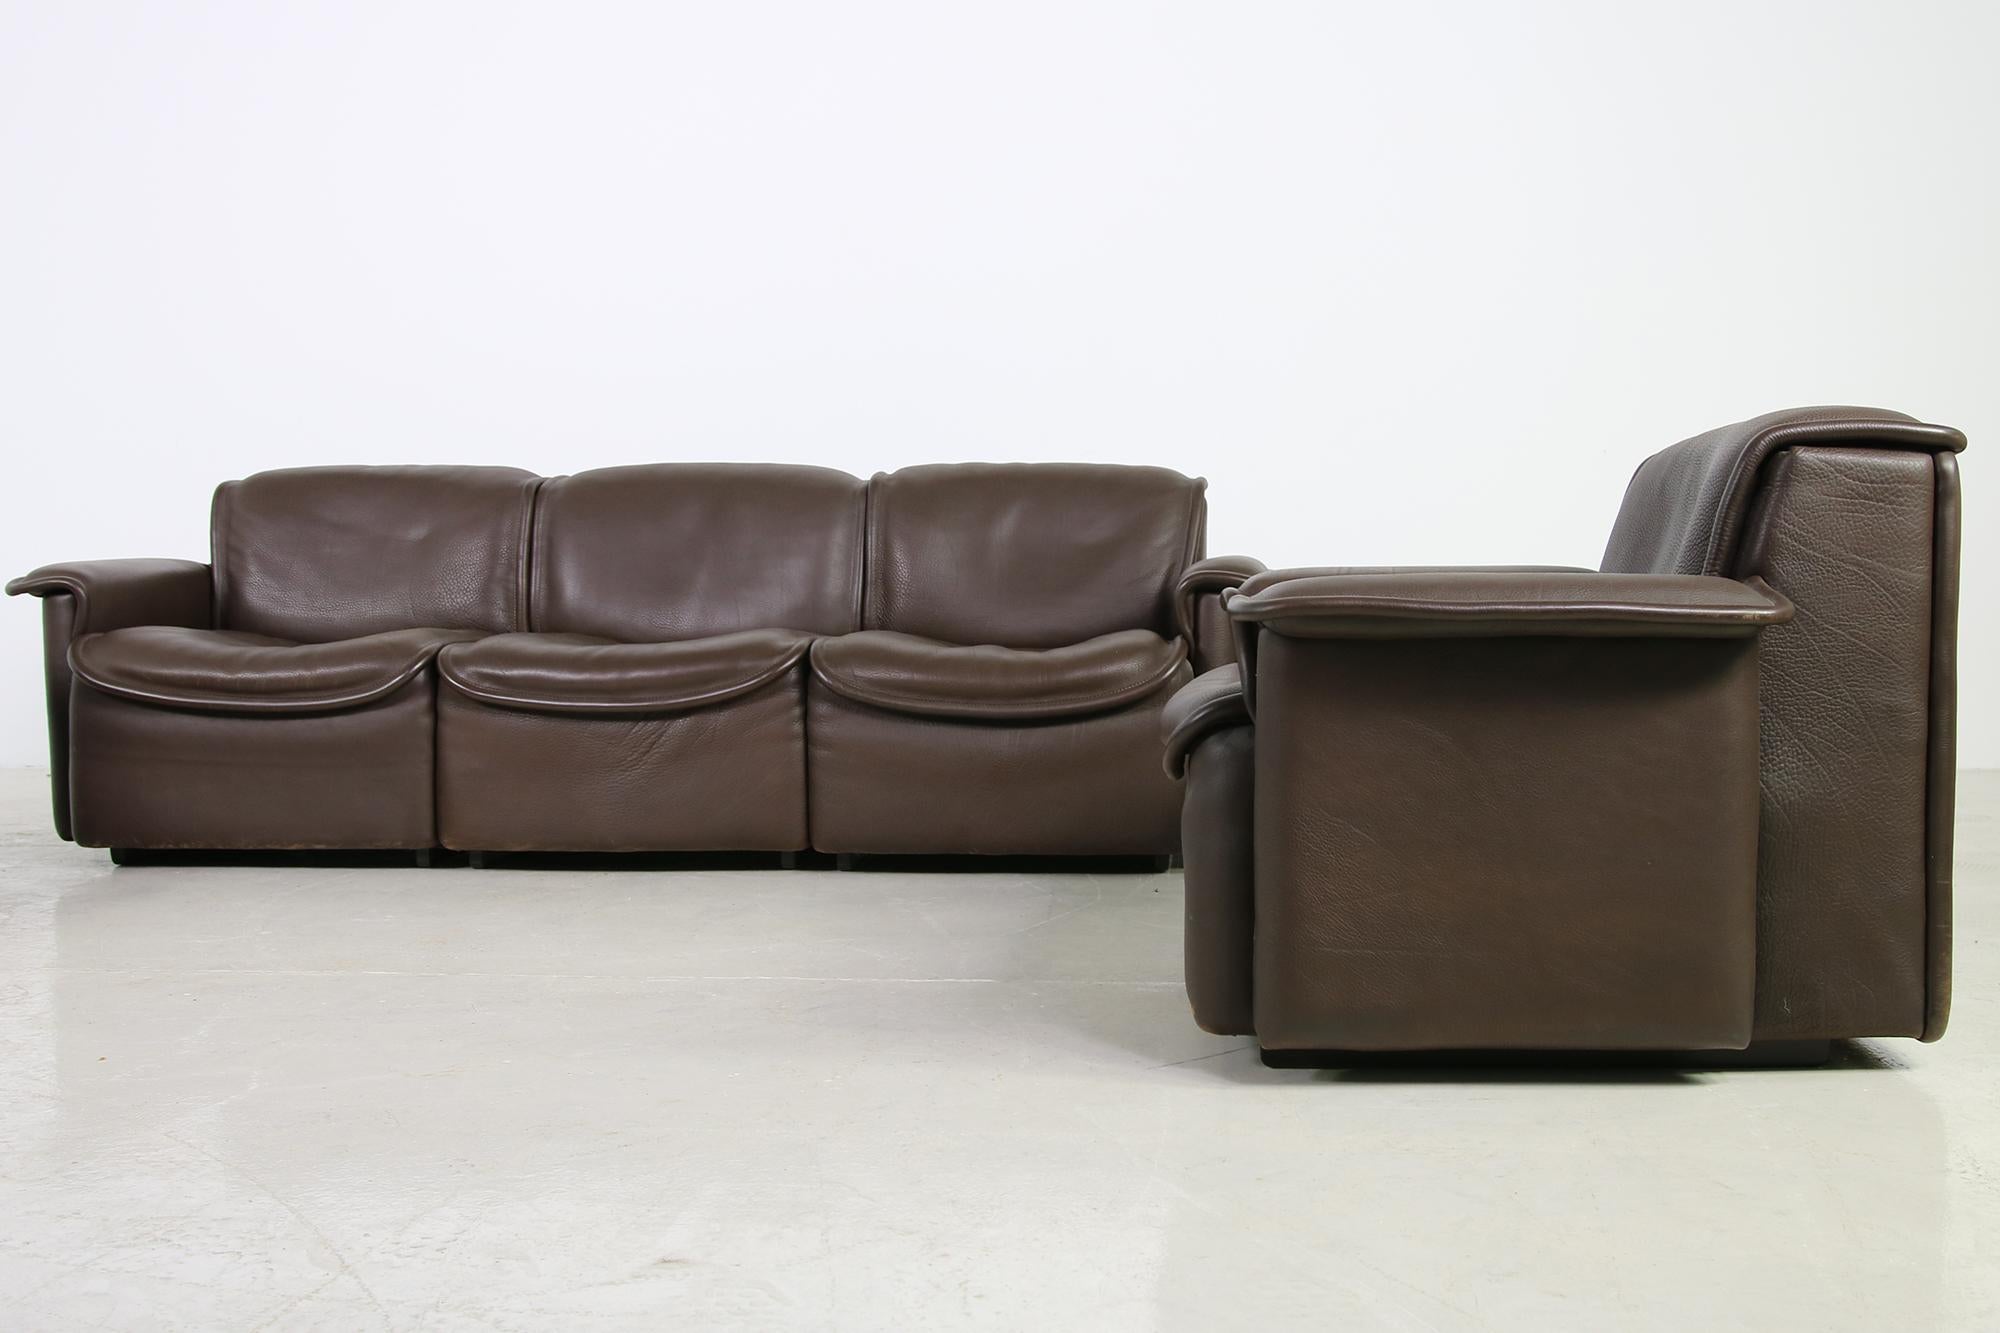 A rare and beautiful set, manufactured in the 1970s by De Sede Switzerland, Mod. DS 12 a three-seat and a matching two seat sofa with a matching chair, a fantastic condition, beautiful dark brown leather, authentic 1970s object in very good vintage